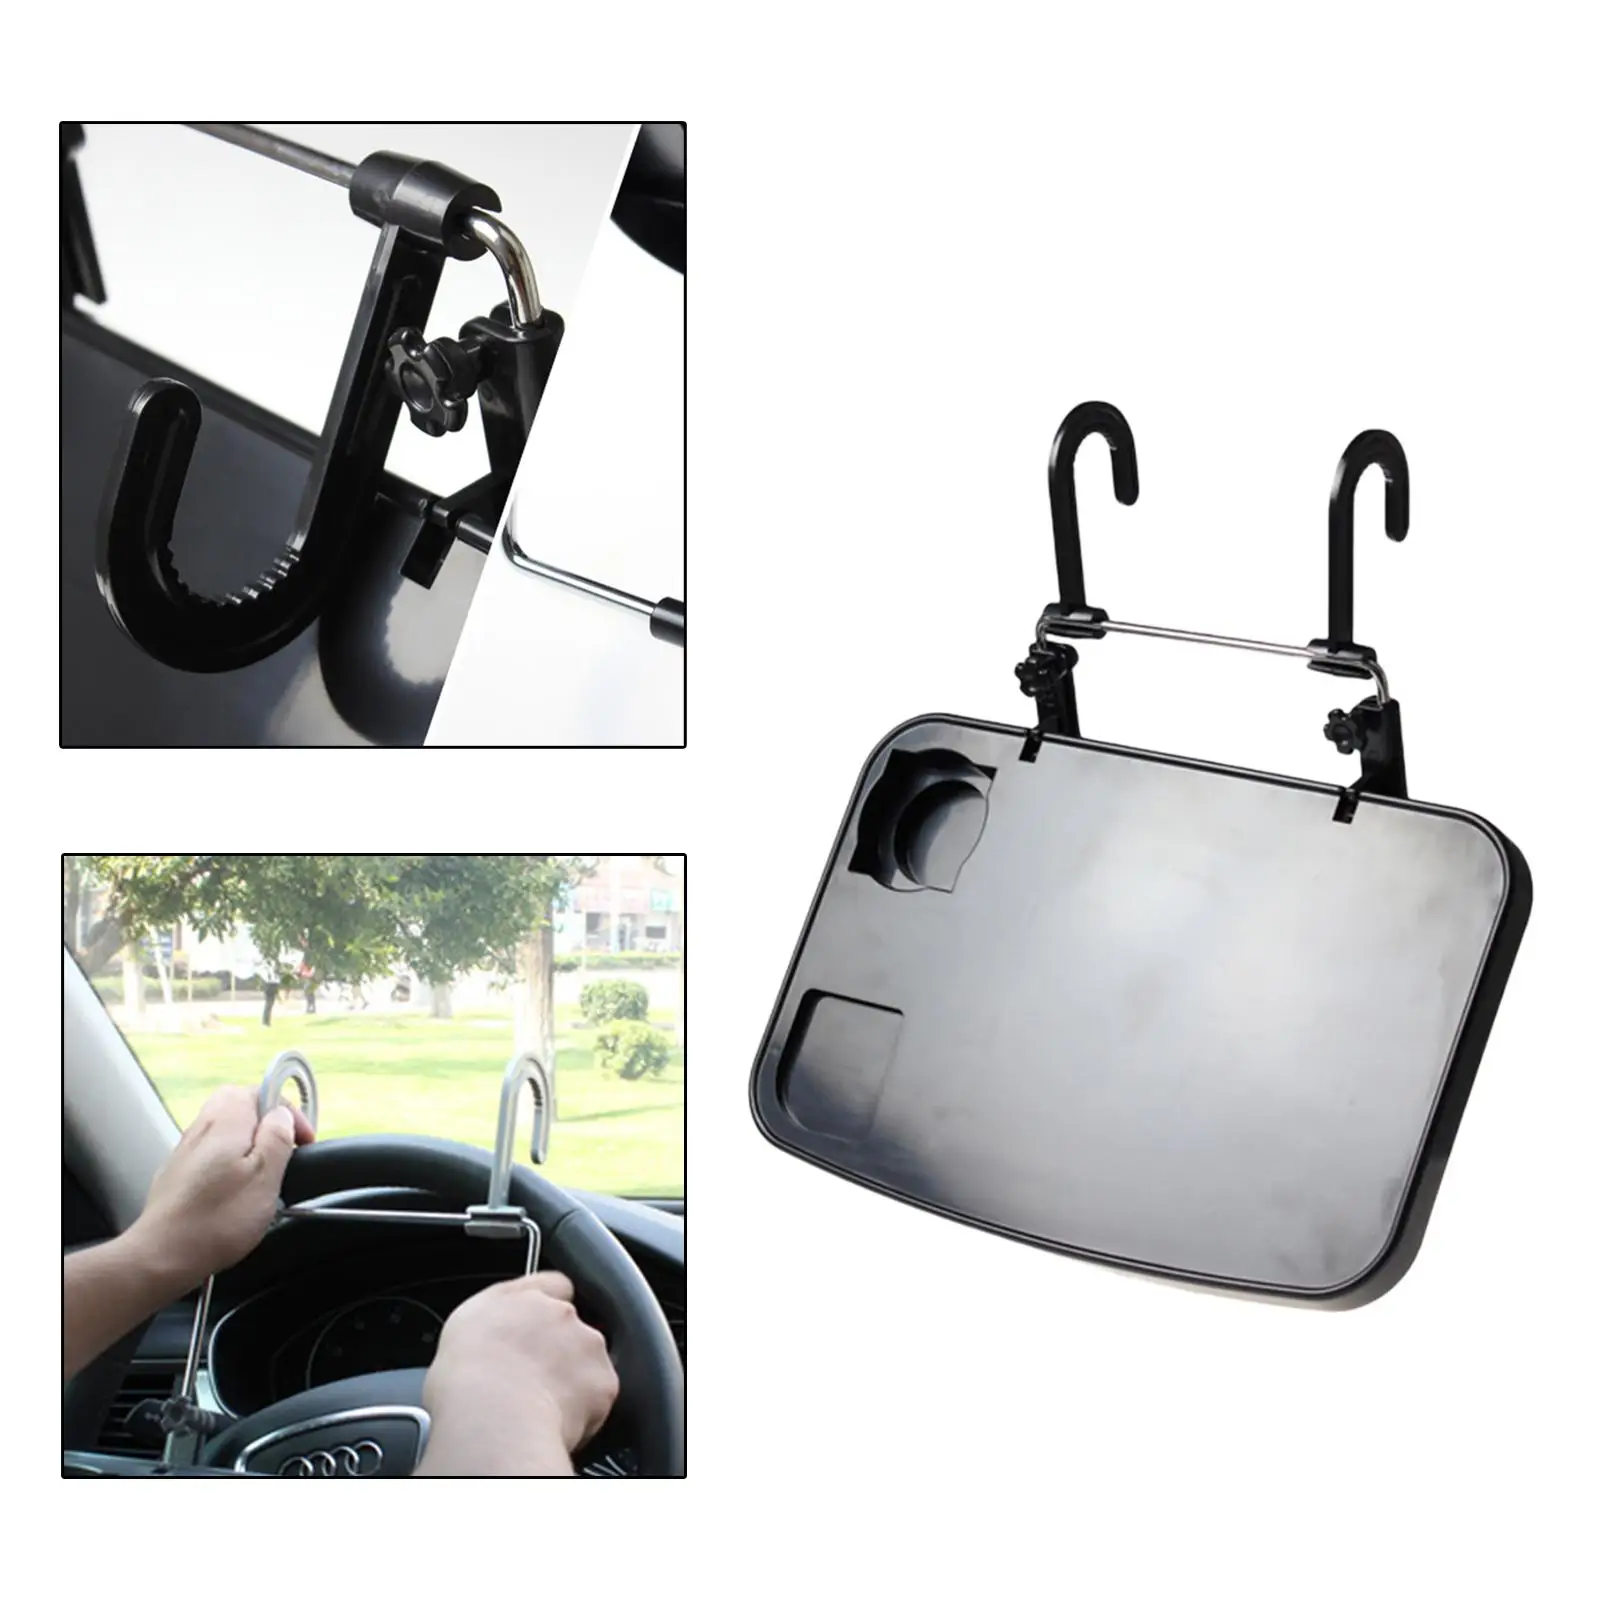 Car Computer Rack Seat Back Laptop Tray Food Drink for Car Travel